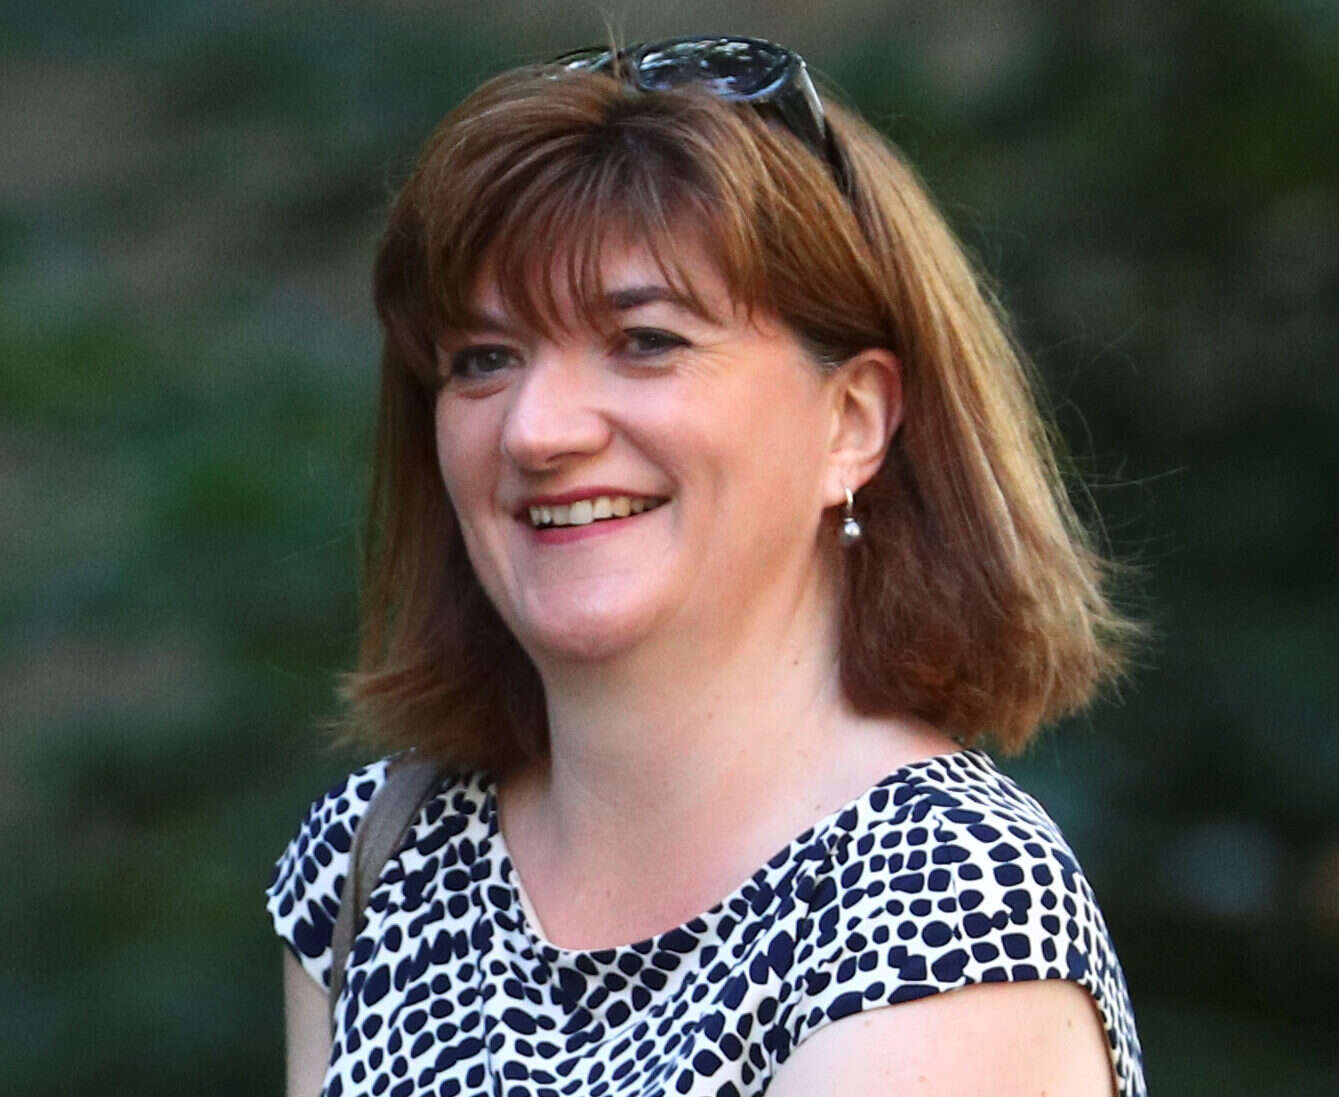 New Culture Secretary Nicky Morgan supported bill granting anonymity under arrest